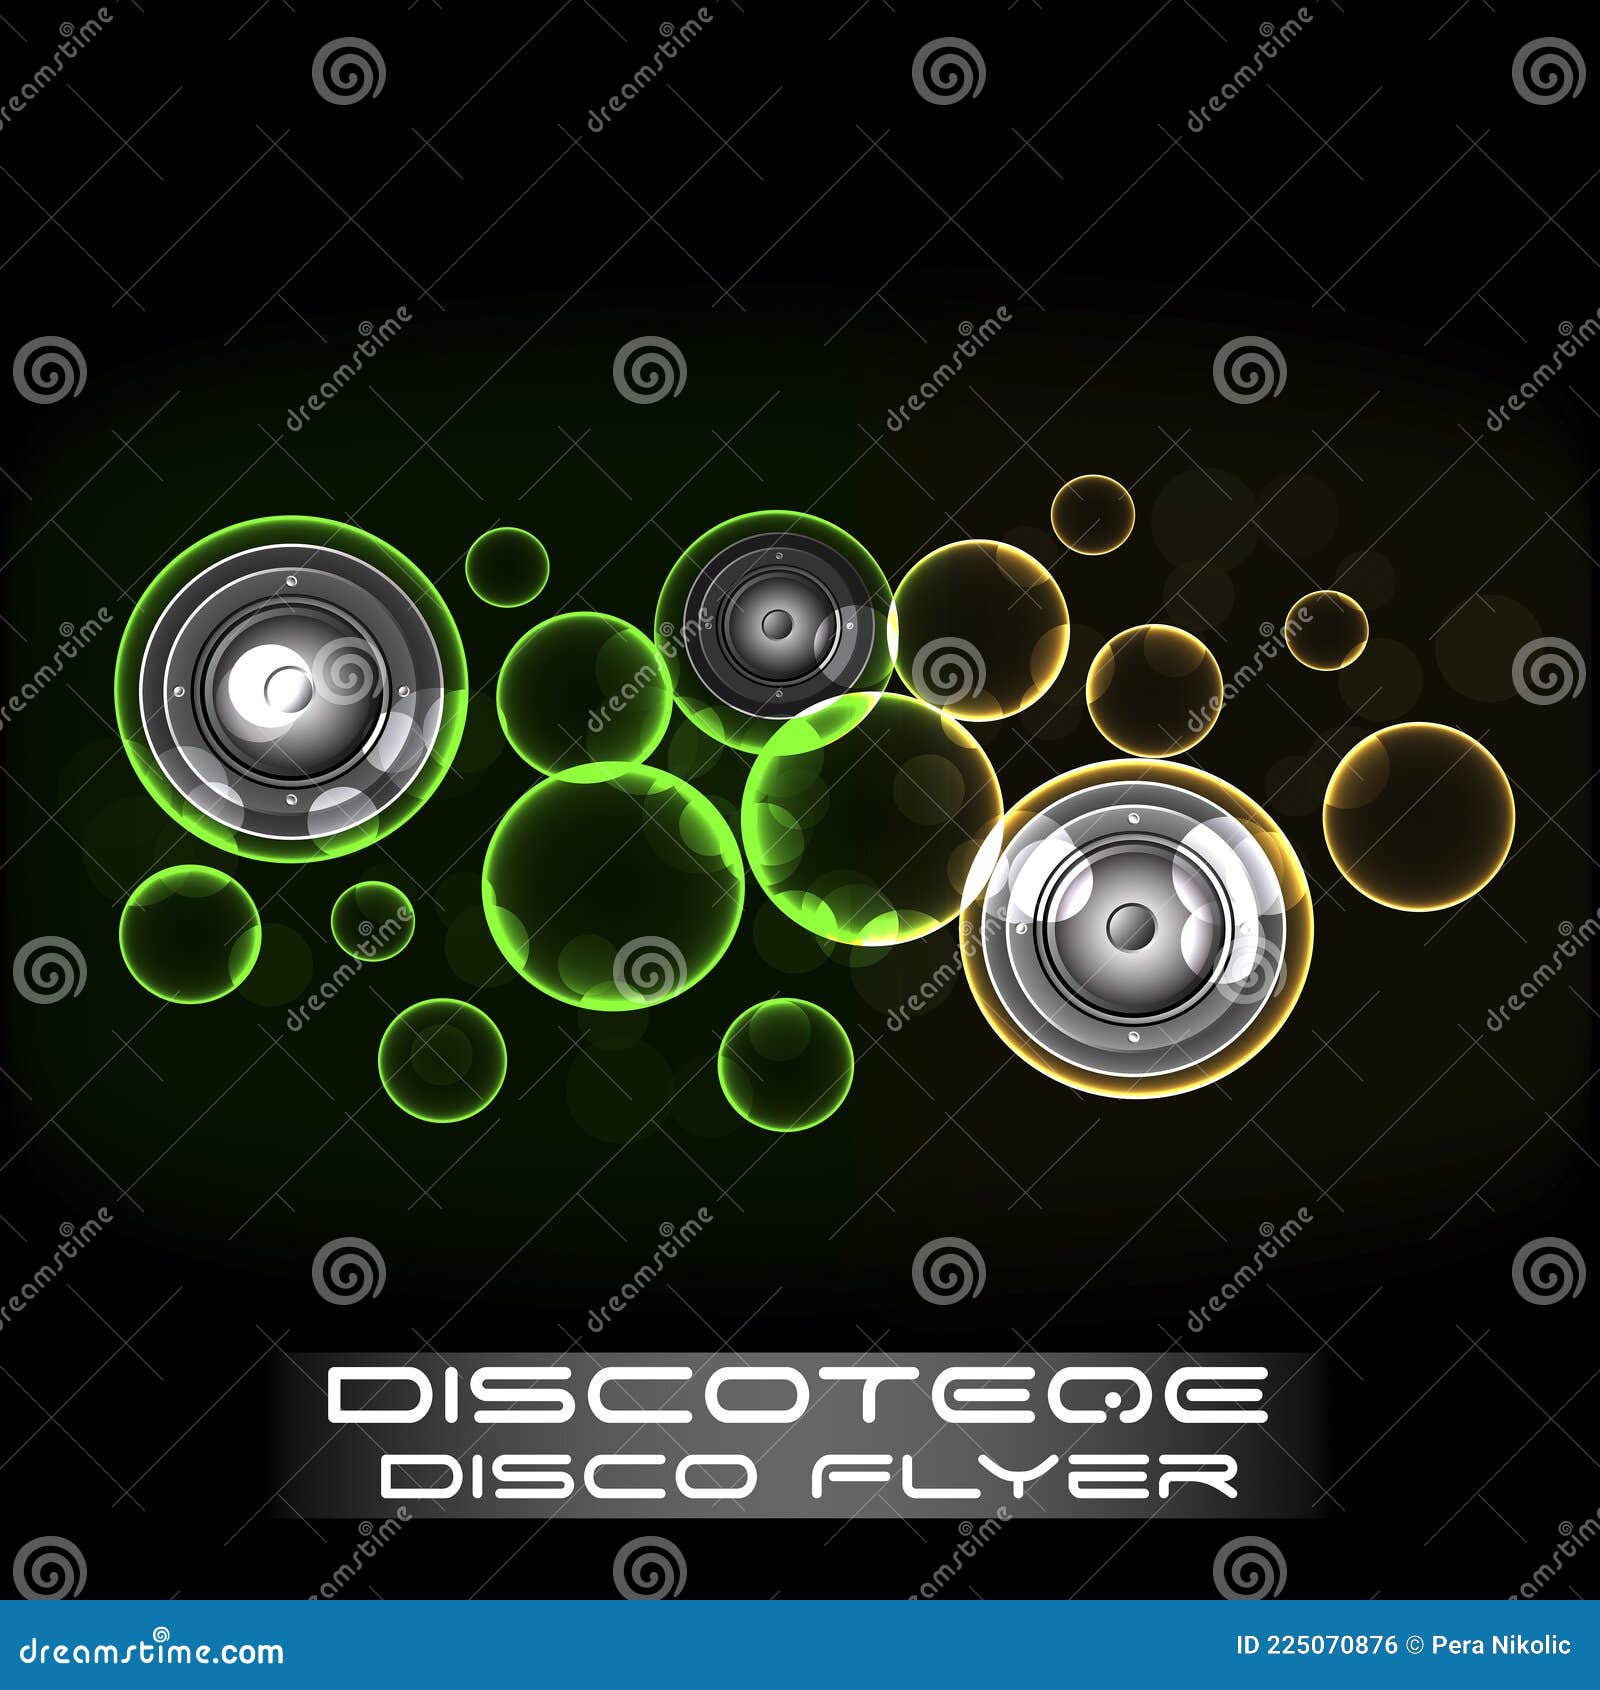 Disco Club Flyer Template For Your Music Nights Event Stock Vector Illustration Of Disc Night